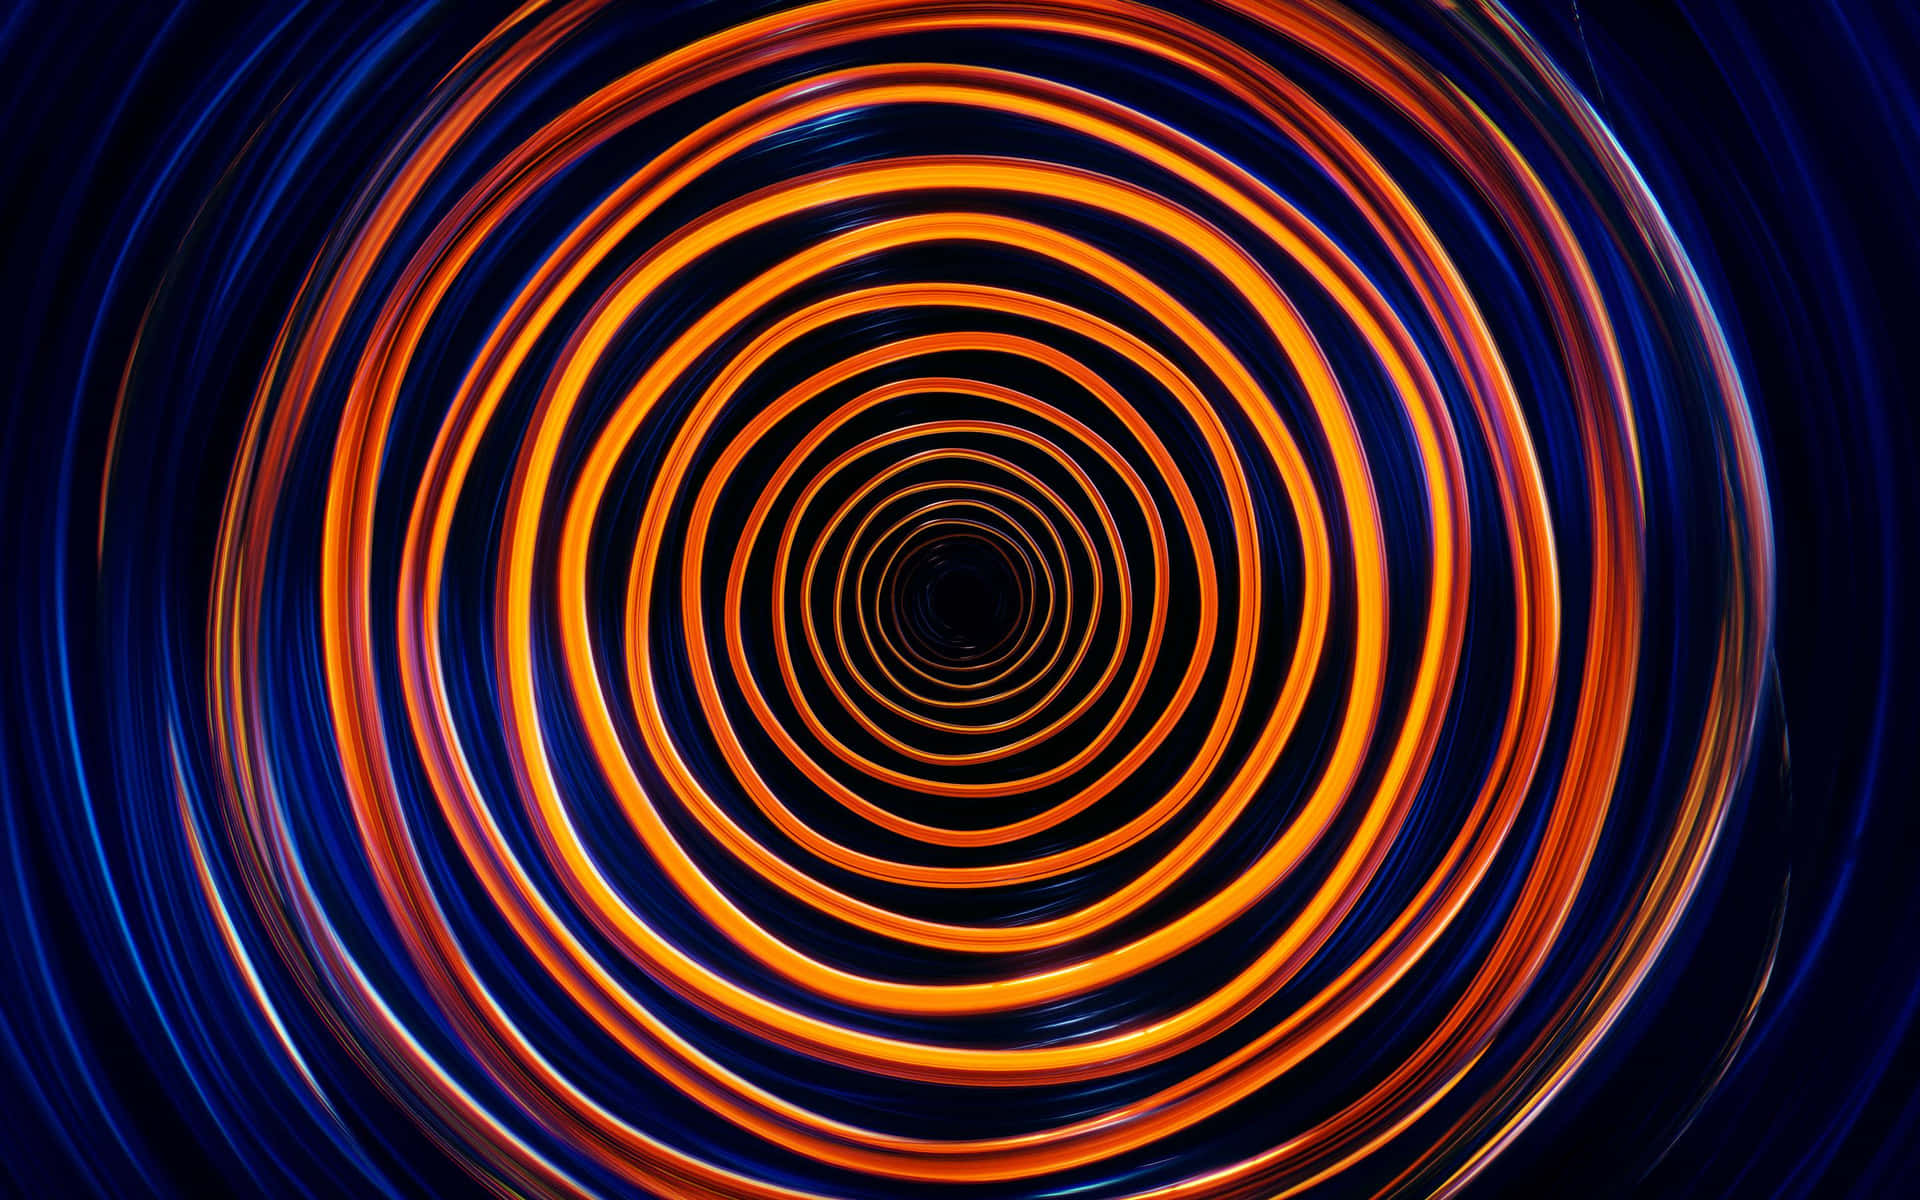 Abstract spiral twisting in a blue light